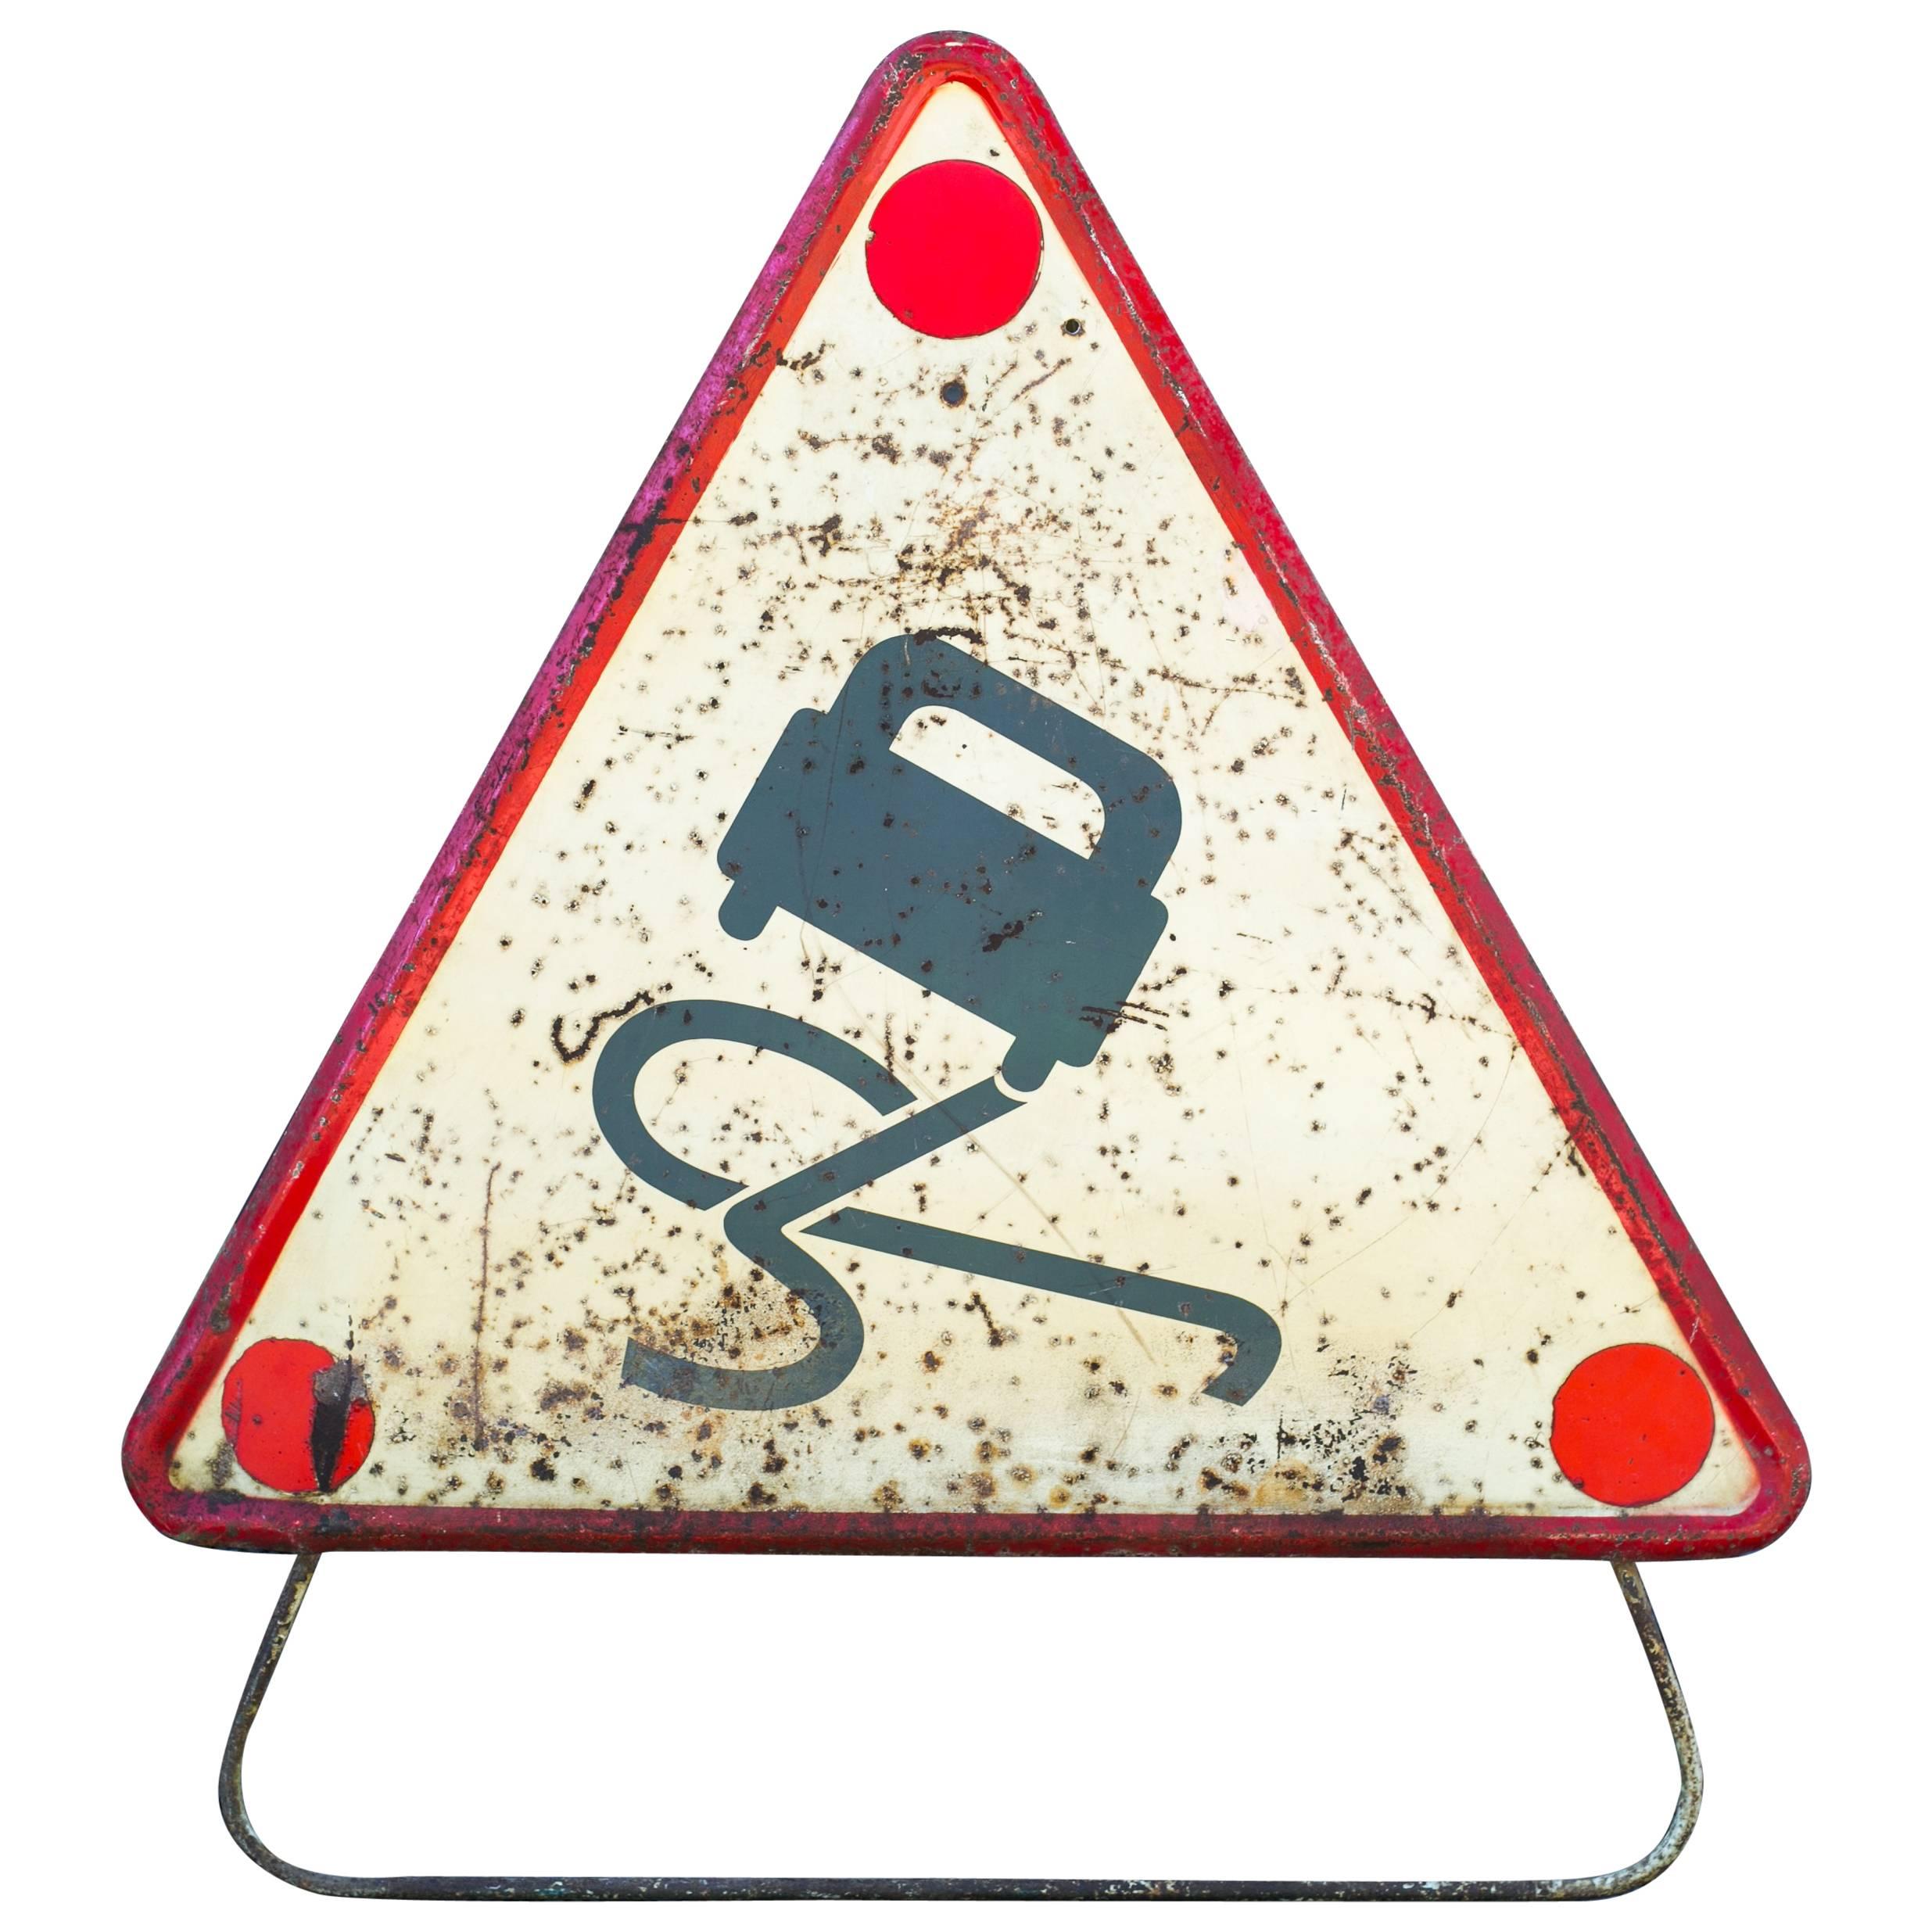 Graphic Triangular Red and Black French Road Safety Sign with Stand